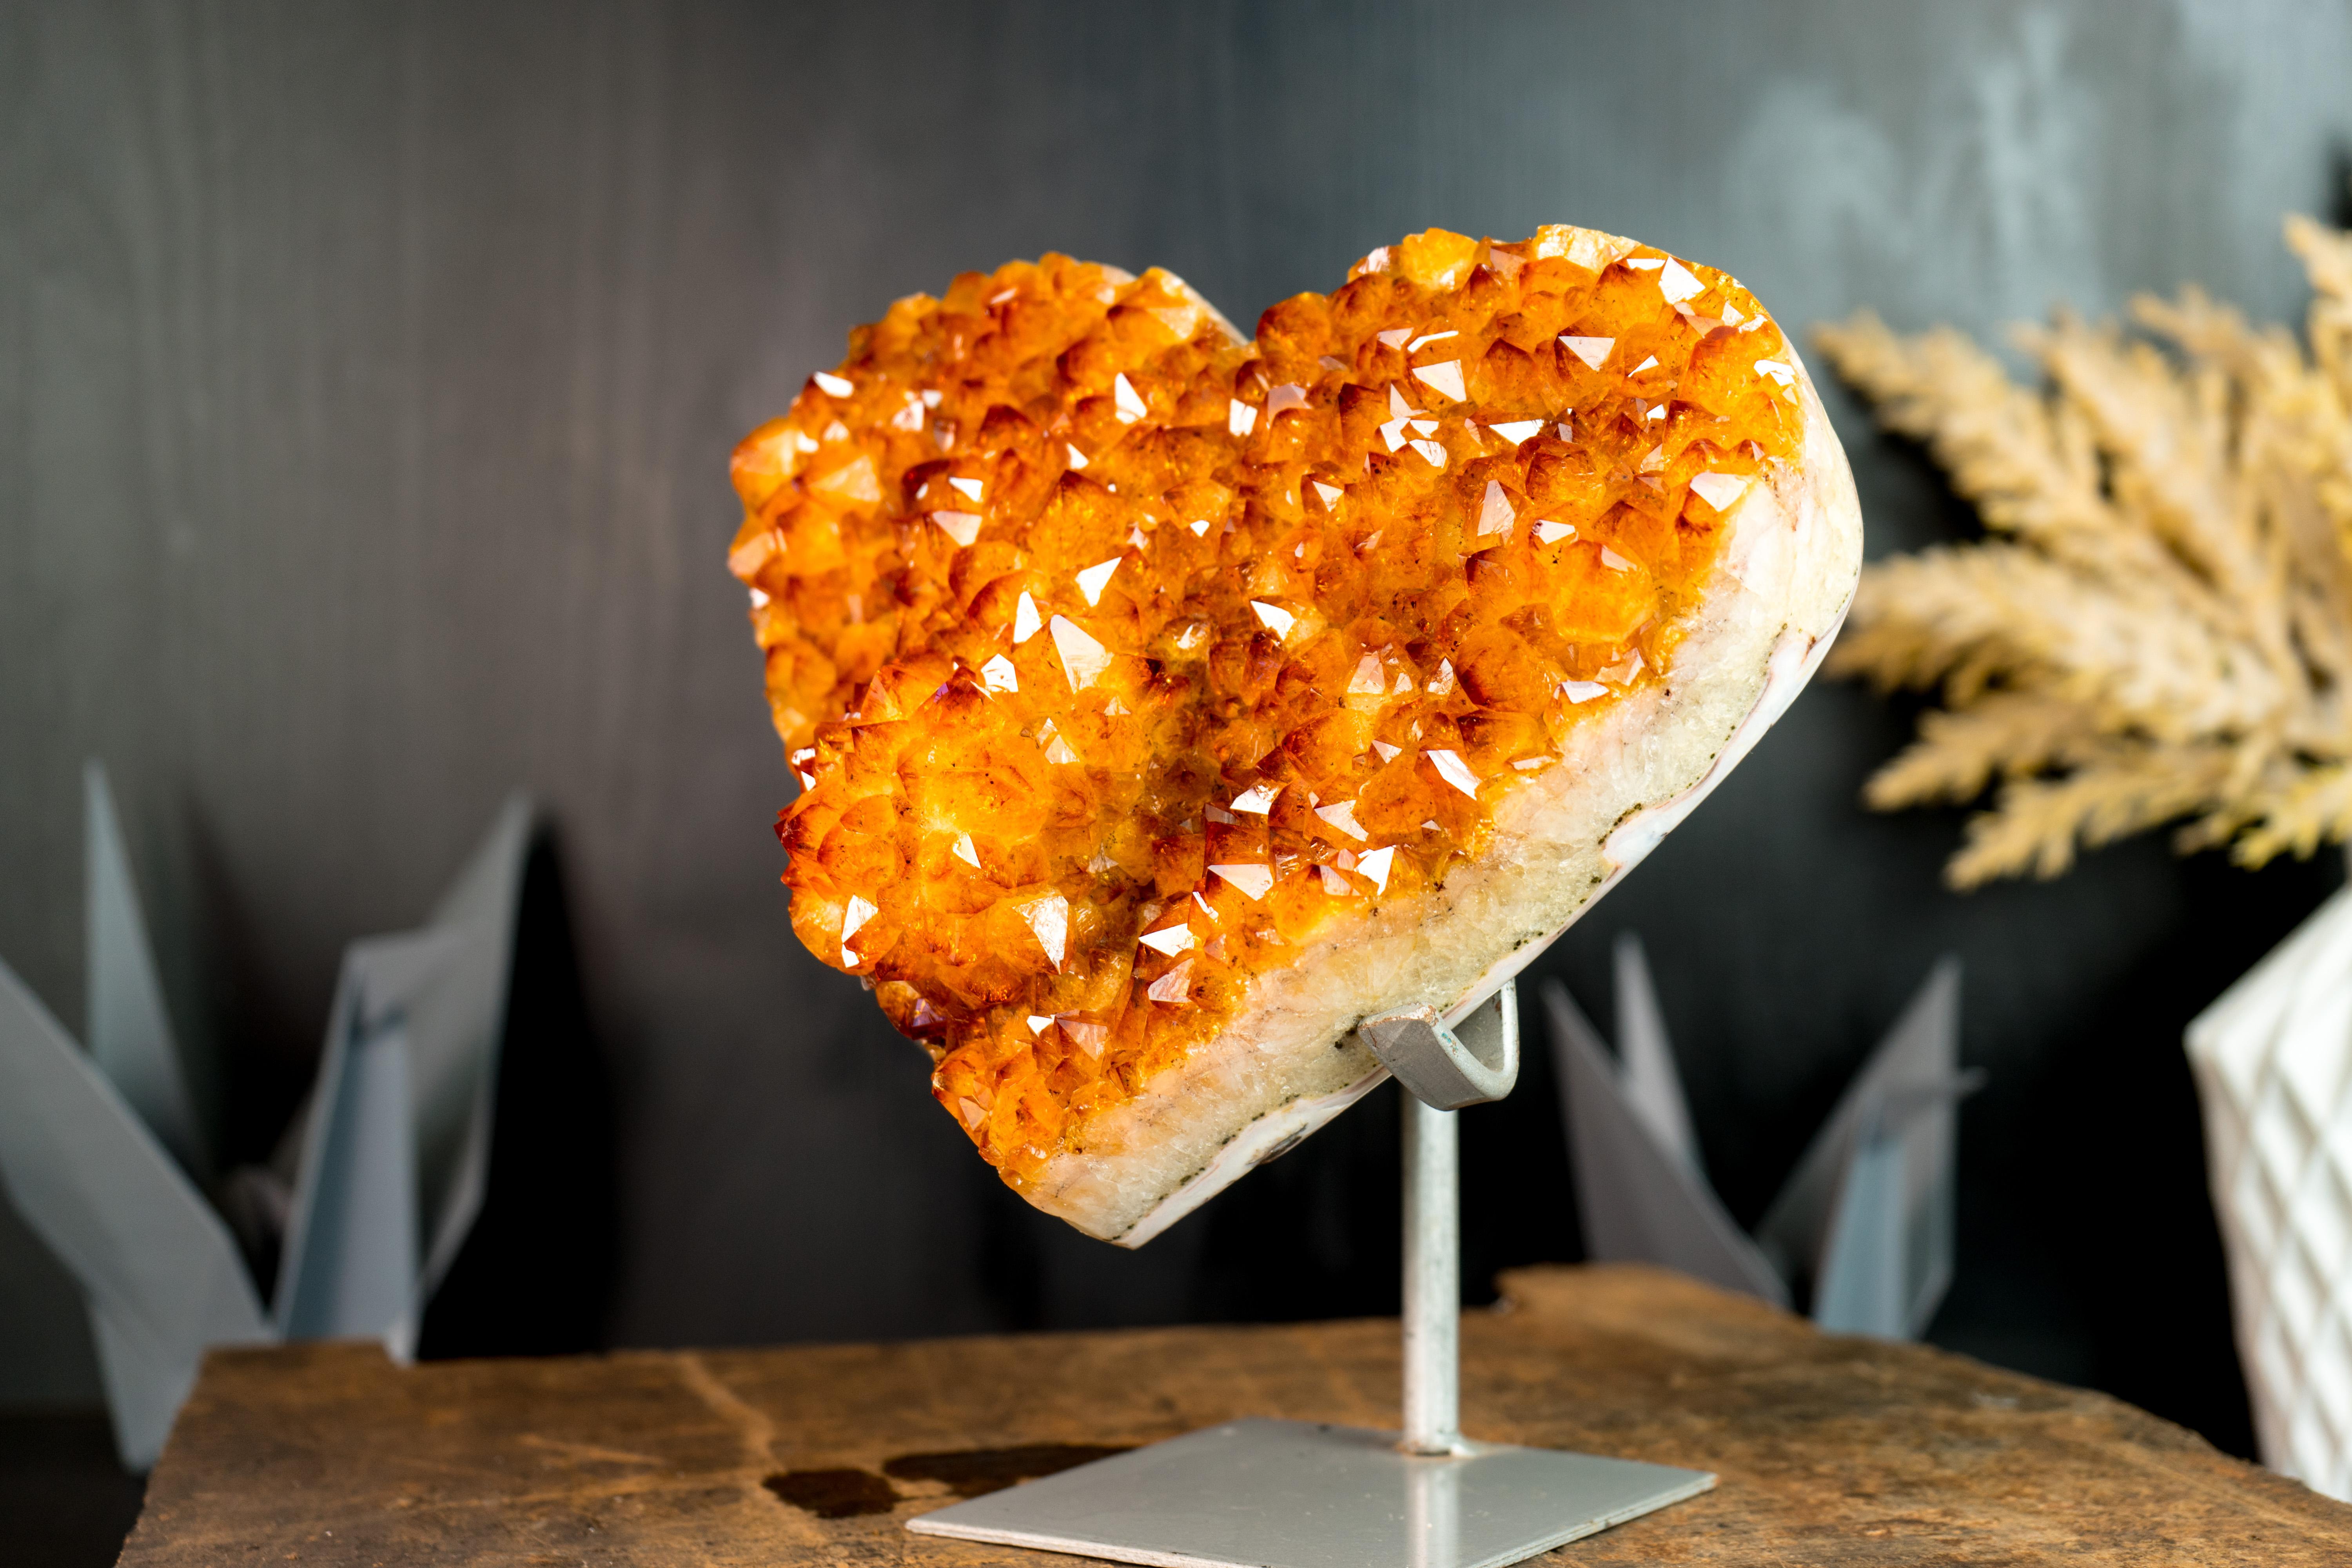 A natural masterpiece, this Citrine Heart brings a flower rosette that seems ready to blossom into radiant beauty, making it the perfect addition to your space or a special gift for someone special.

The specimen brings a high-grade (AAA) golden